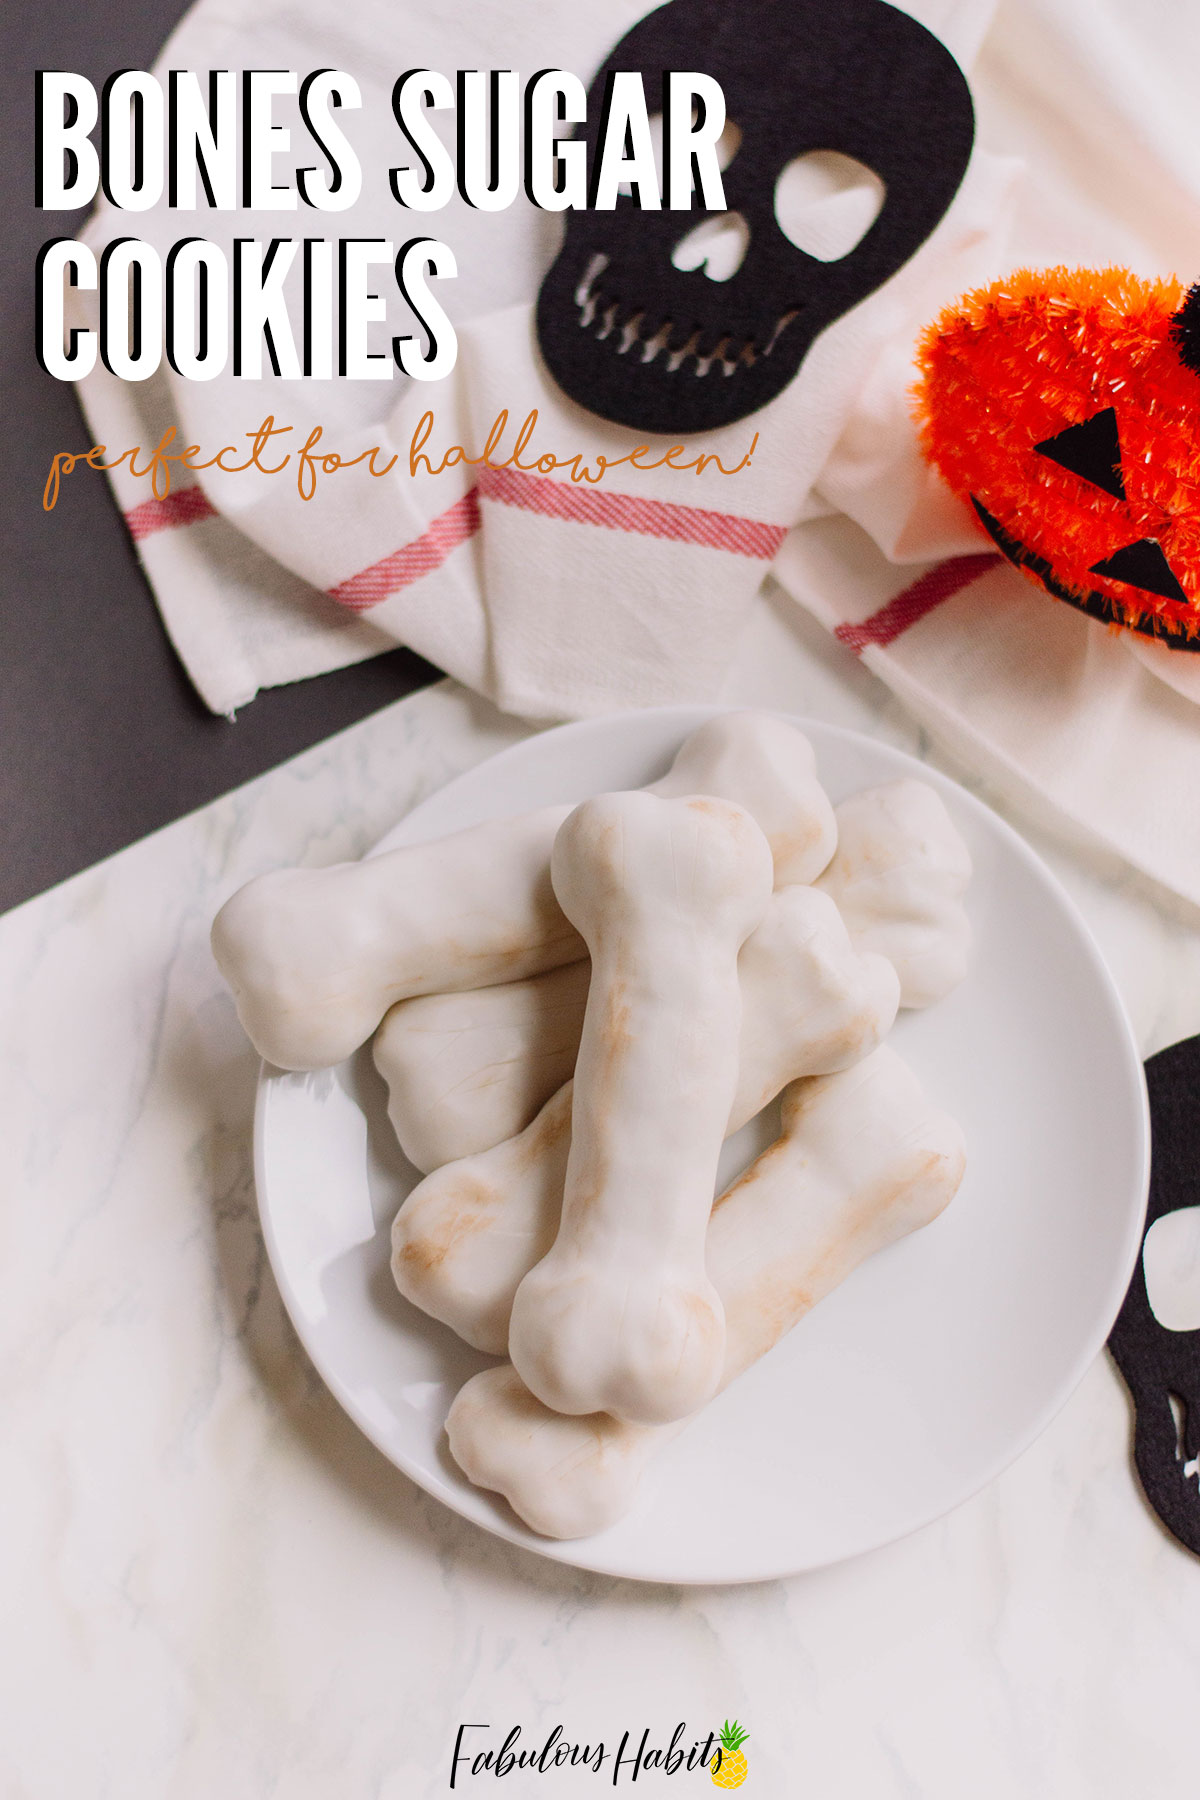 A DIY to create your own sugar bone cookies - perfect for any Halloween party! #halloweendesserts